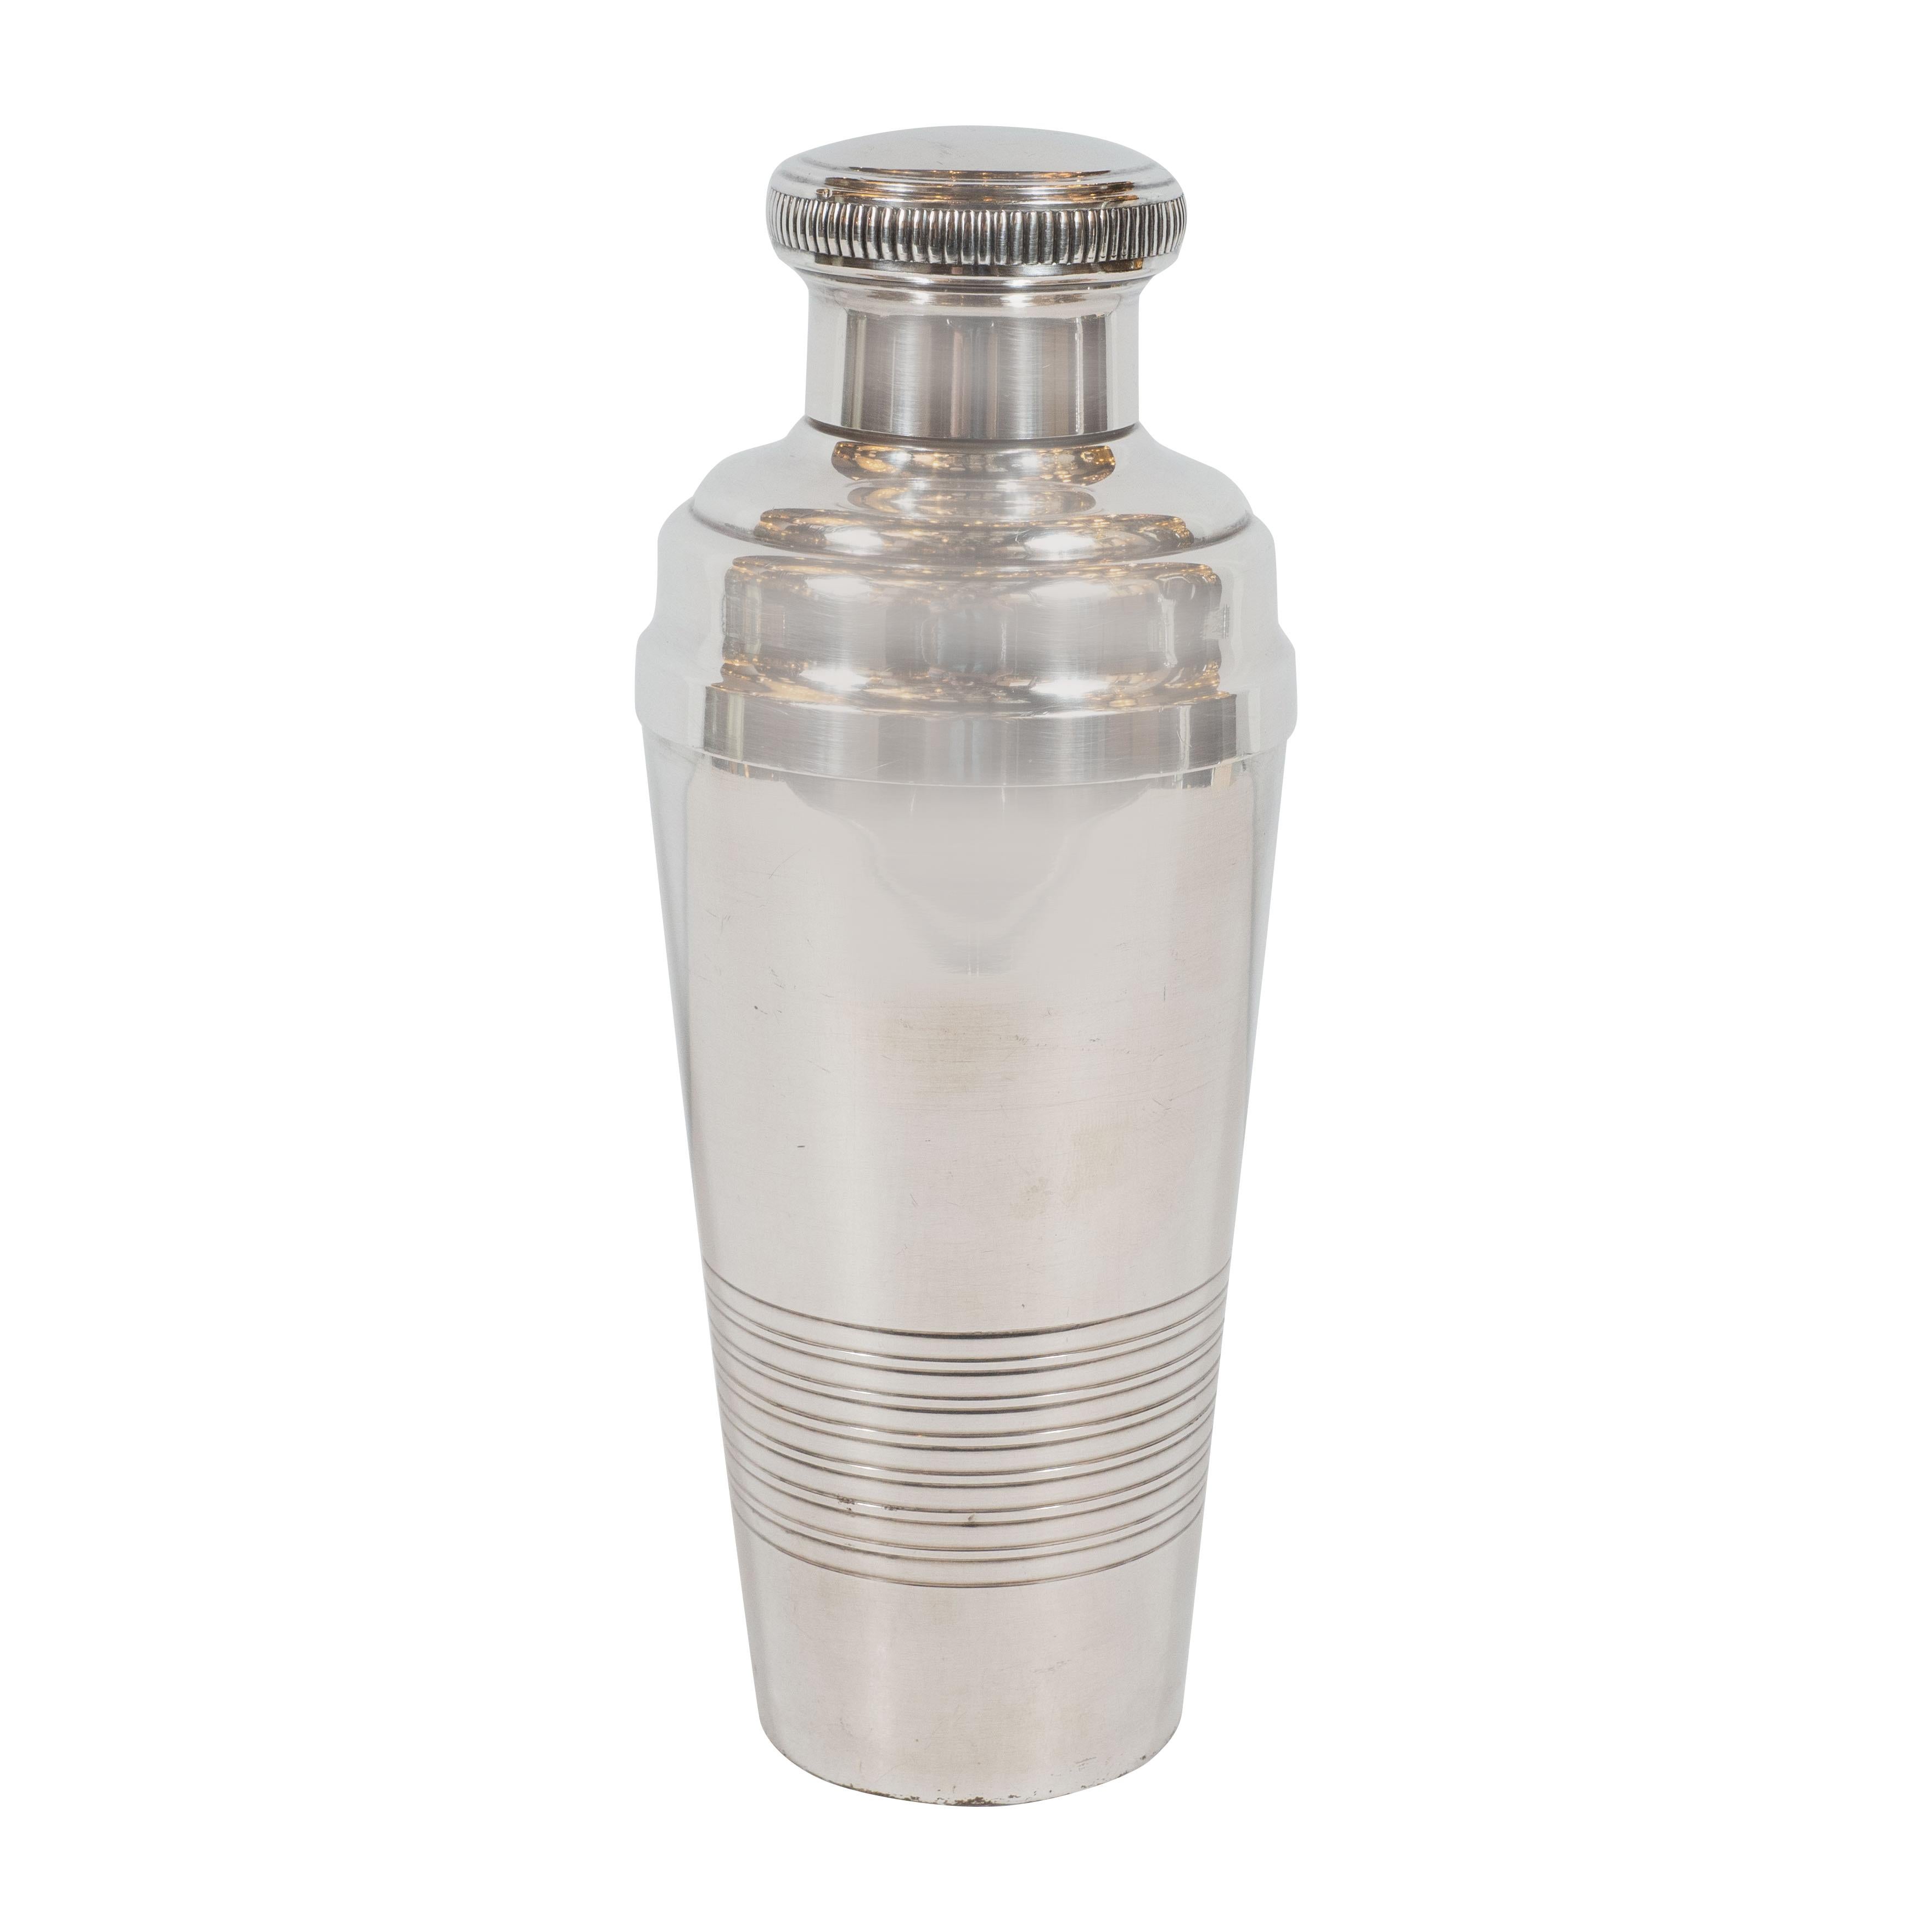 This three-piece French Art Deco silver plate cocktail Shaker was realized in France circa 1930. Recalling the sleek machine age aesthetic of late Art Deco, the Shaker's tumbler has a smooth streamlined profile, which is circumscribed by a pattern